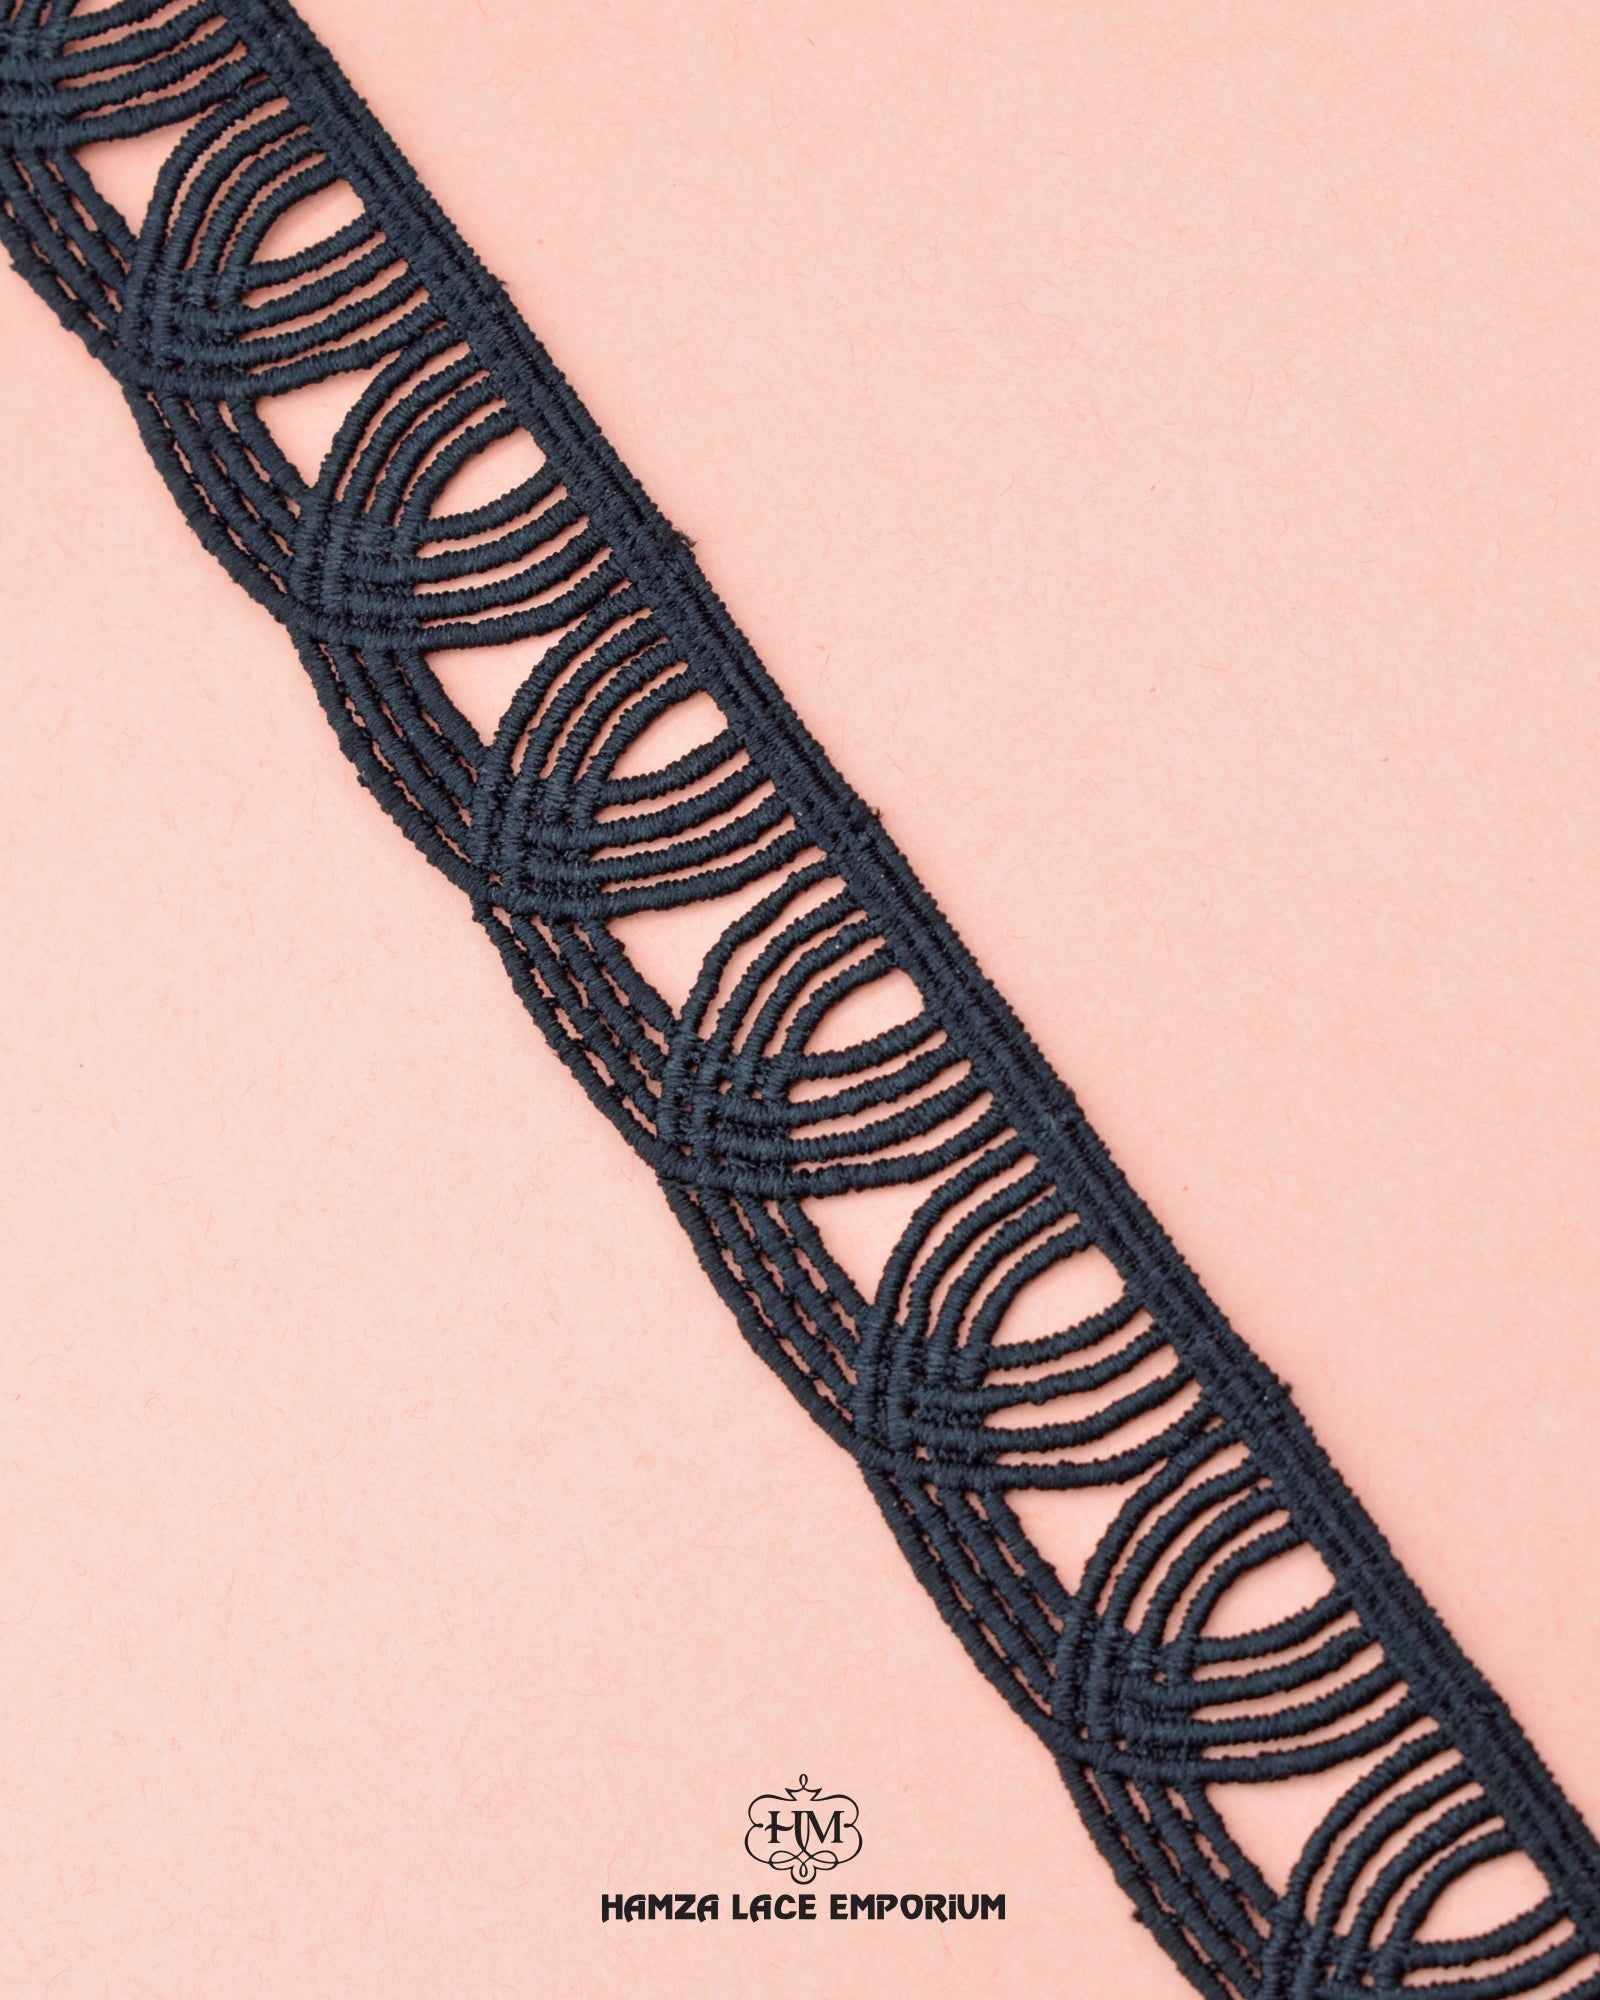 The black color 'Edging Loop Lace 17787' is shown with the brand name ' Hamza Lace' and logo written below